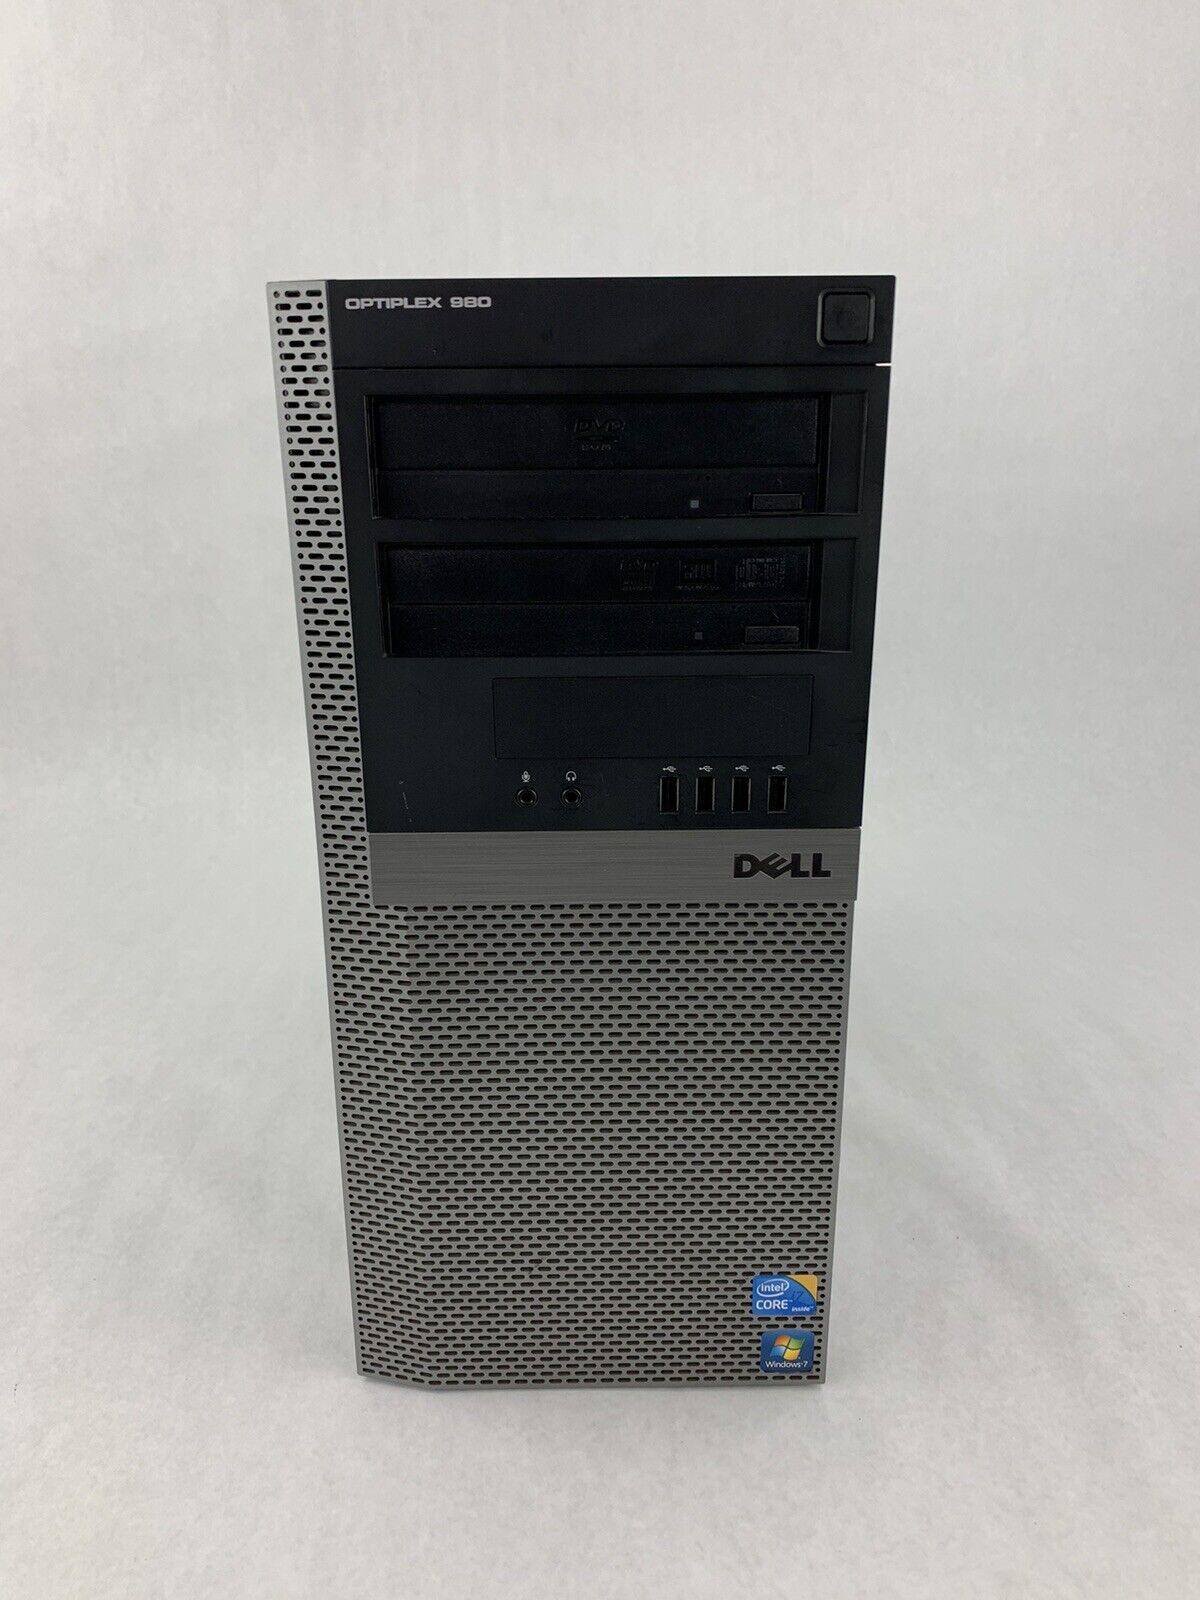 Dell  OPTIPLEX 980, i7-860, 2.8 GHz, 4G ram, TESTED No HDD or OS